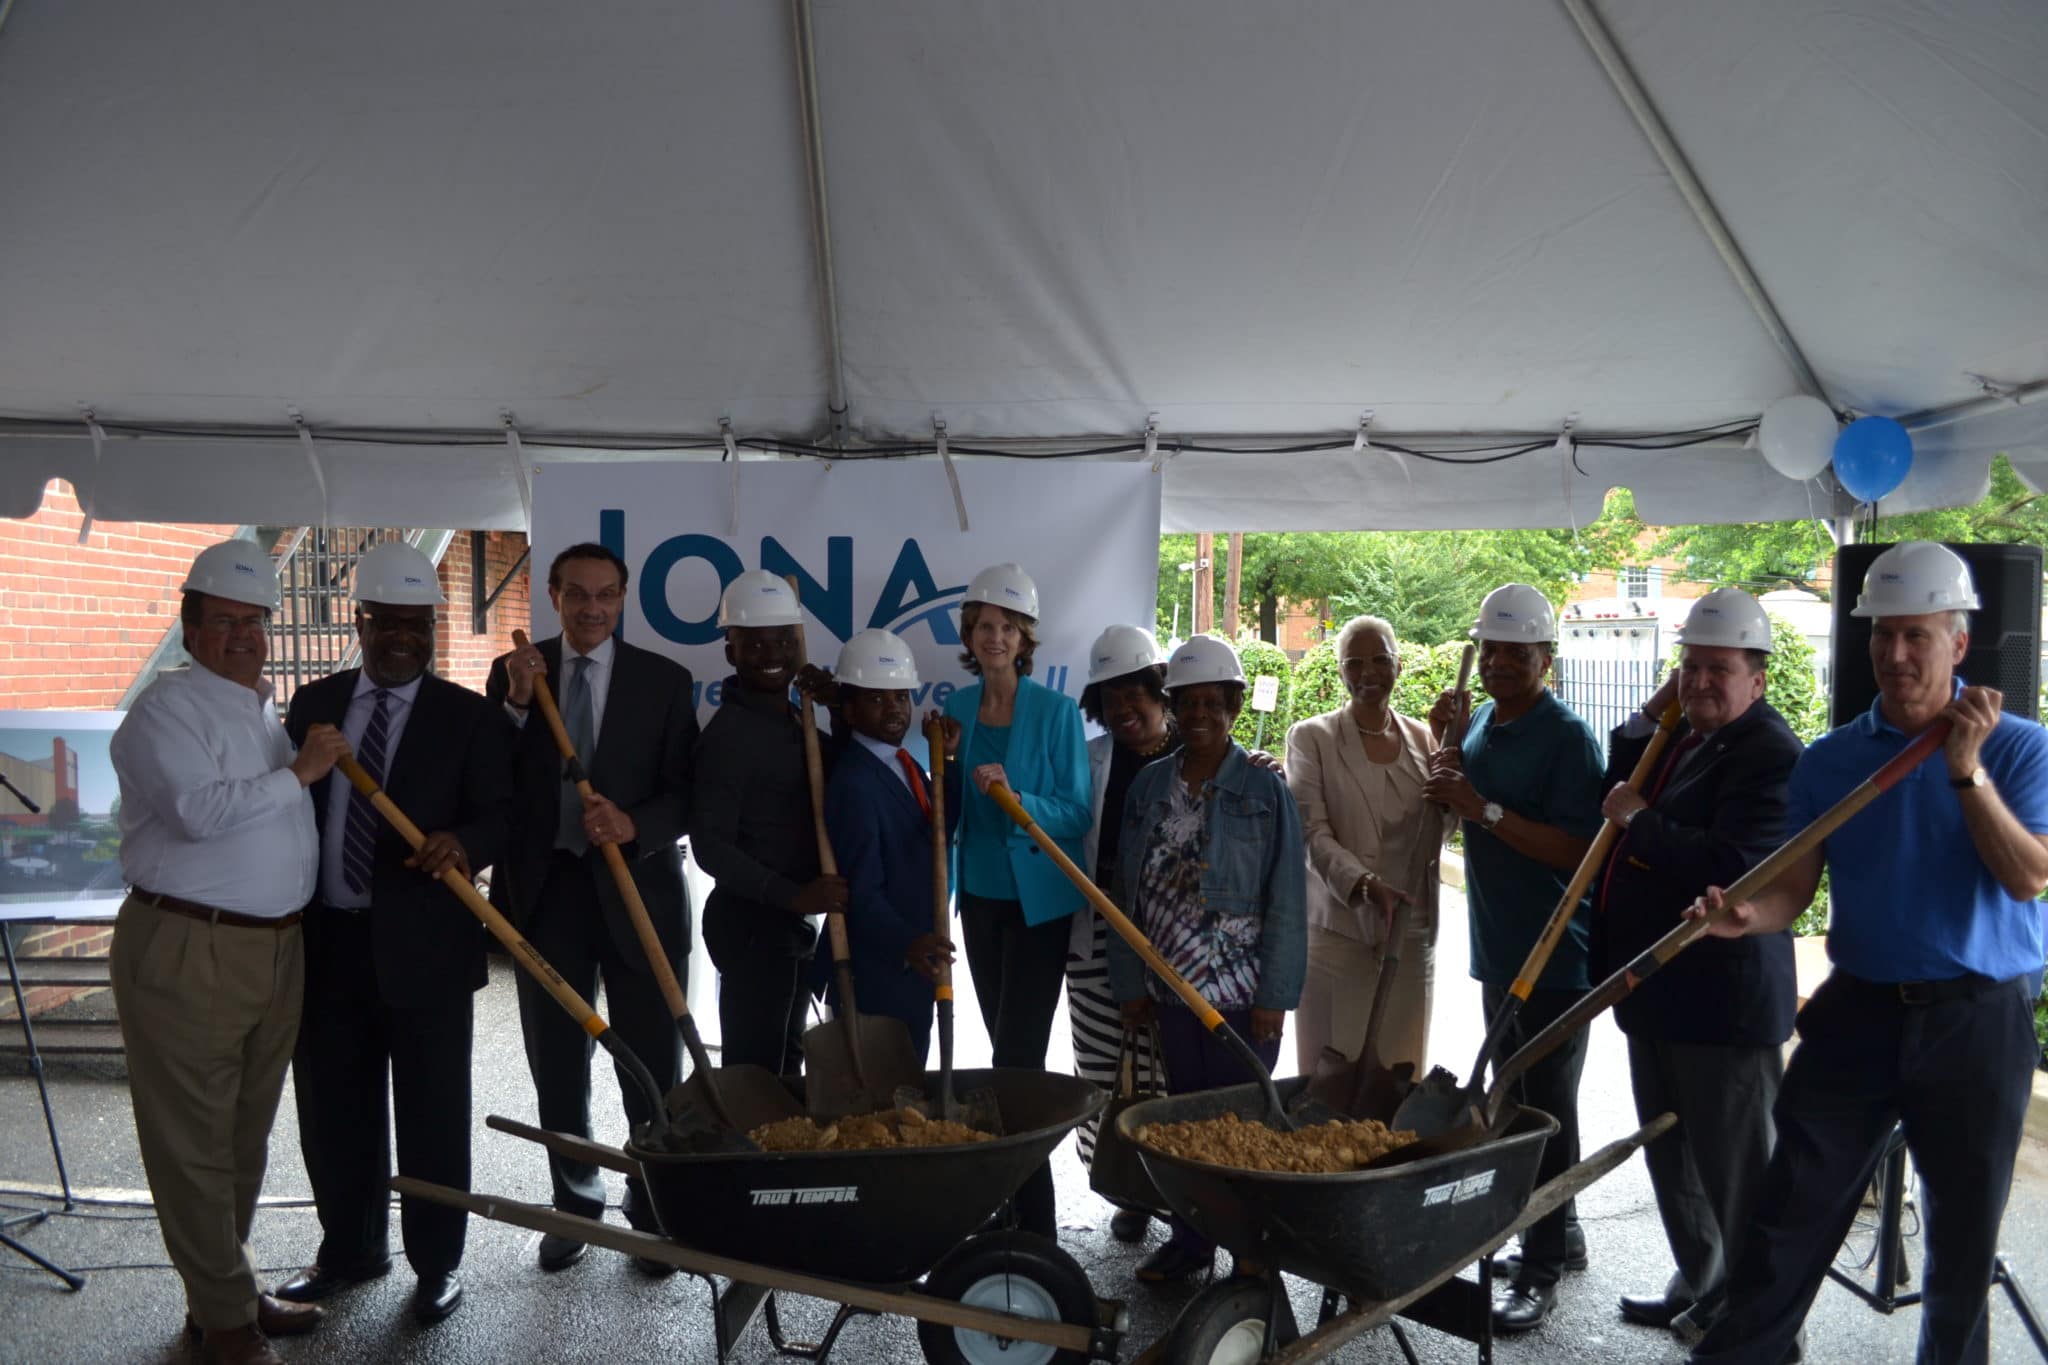 WC Smith Joins Iona Senior Services at Groundbreaking for Ward 8 Location